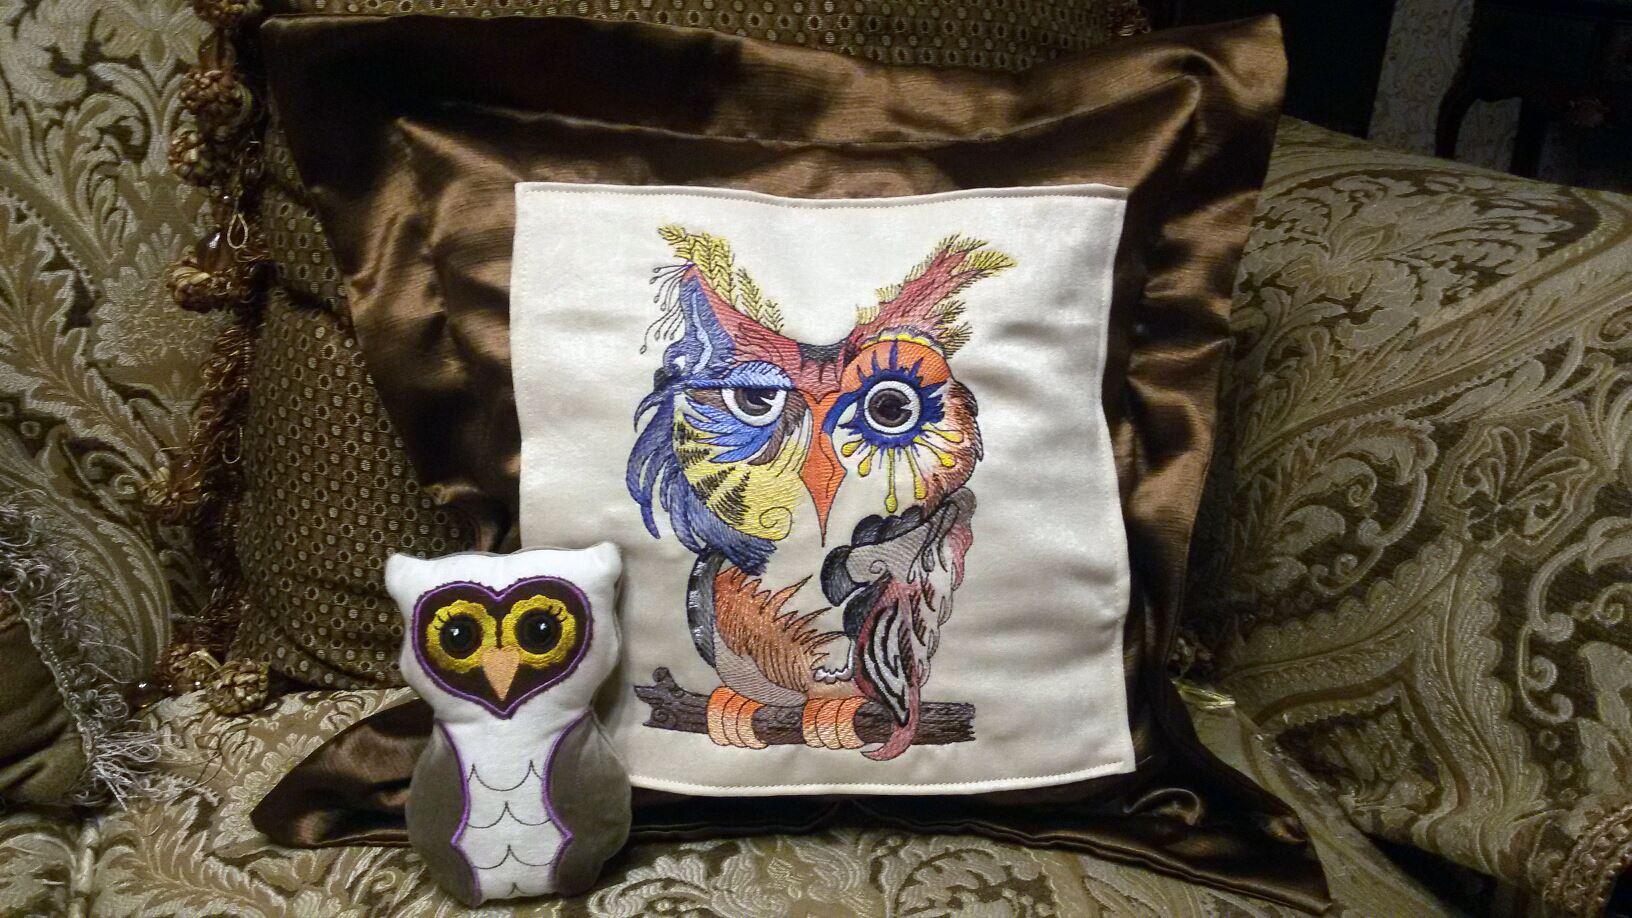 Embroidered set with Colorful owl design